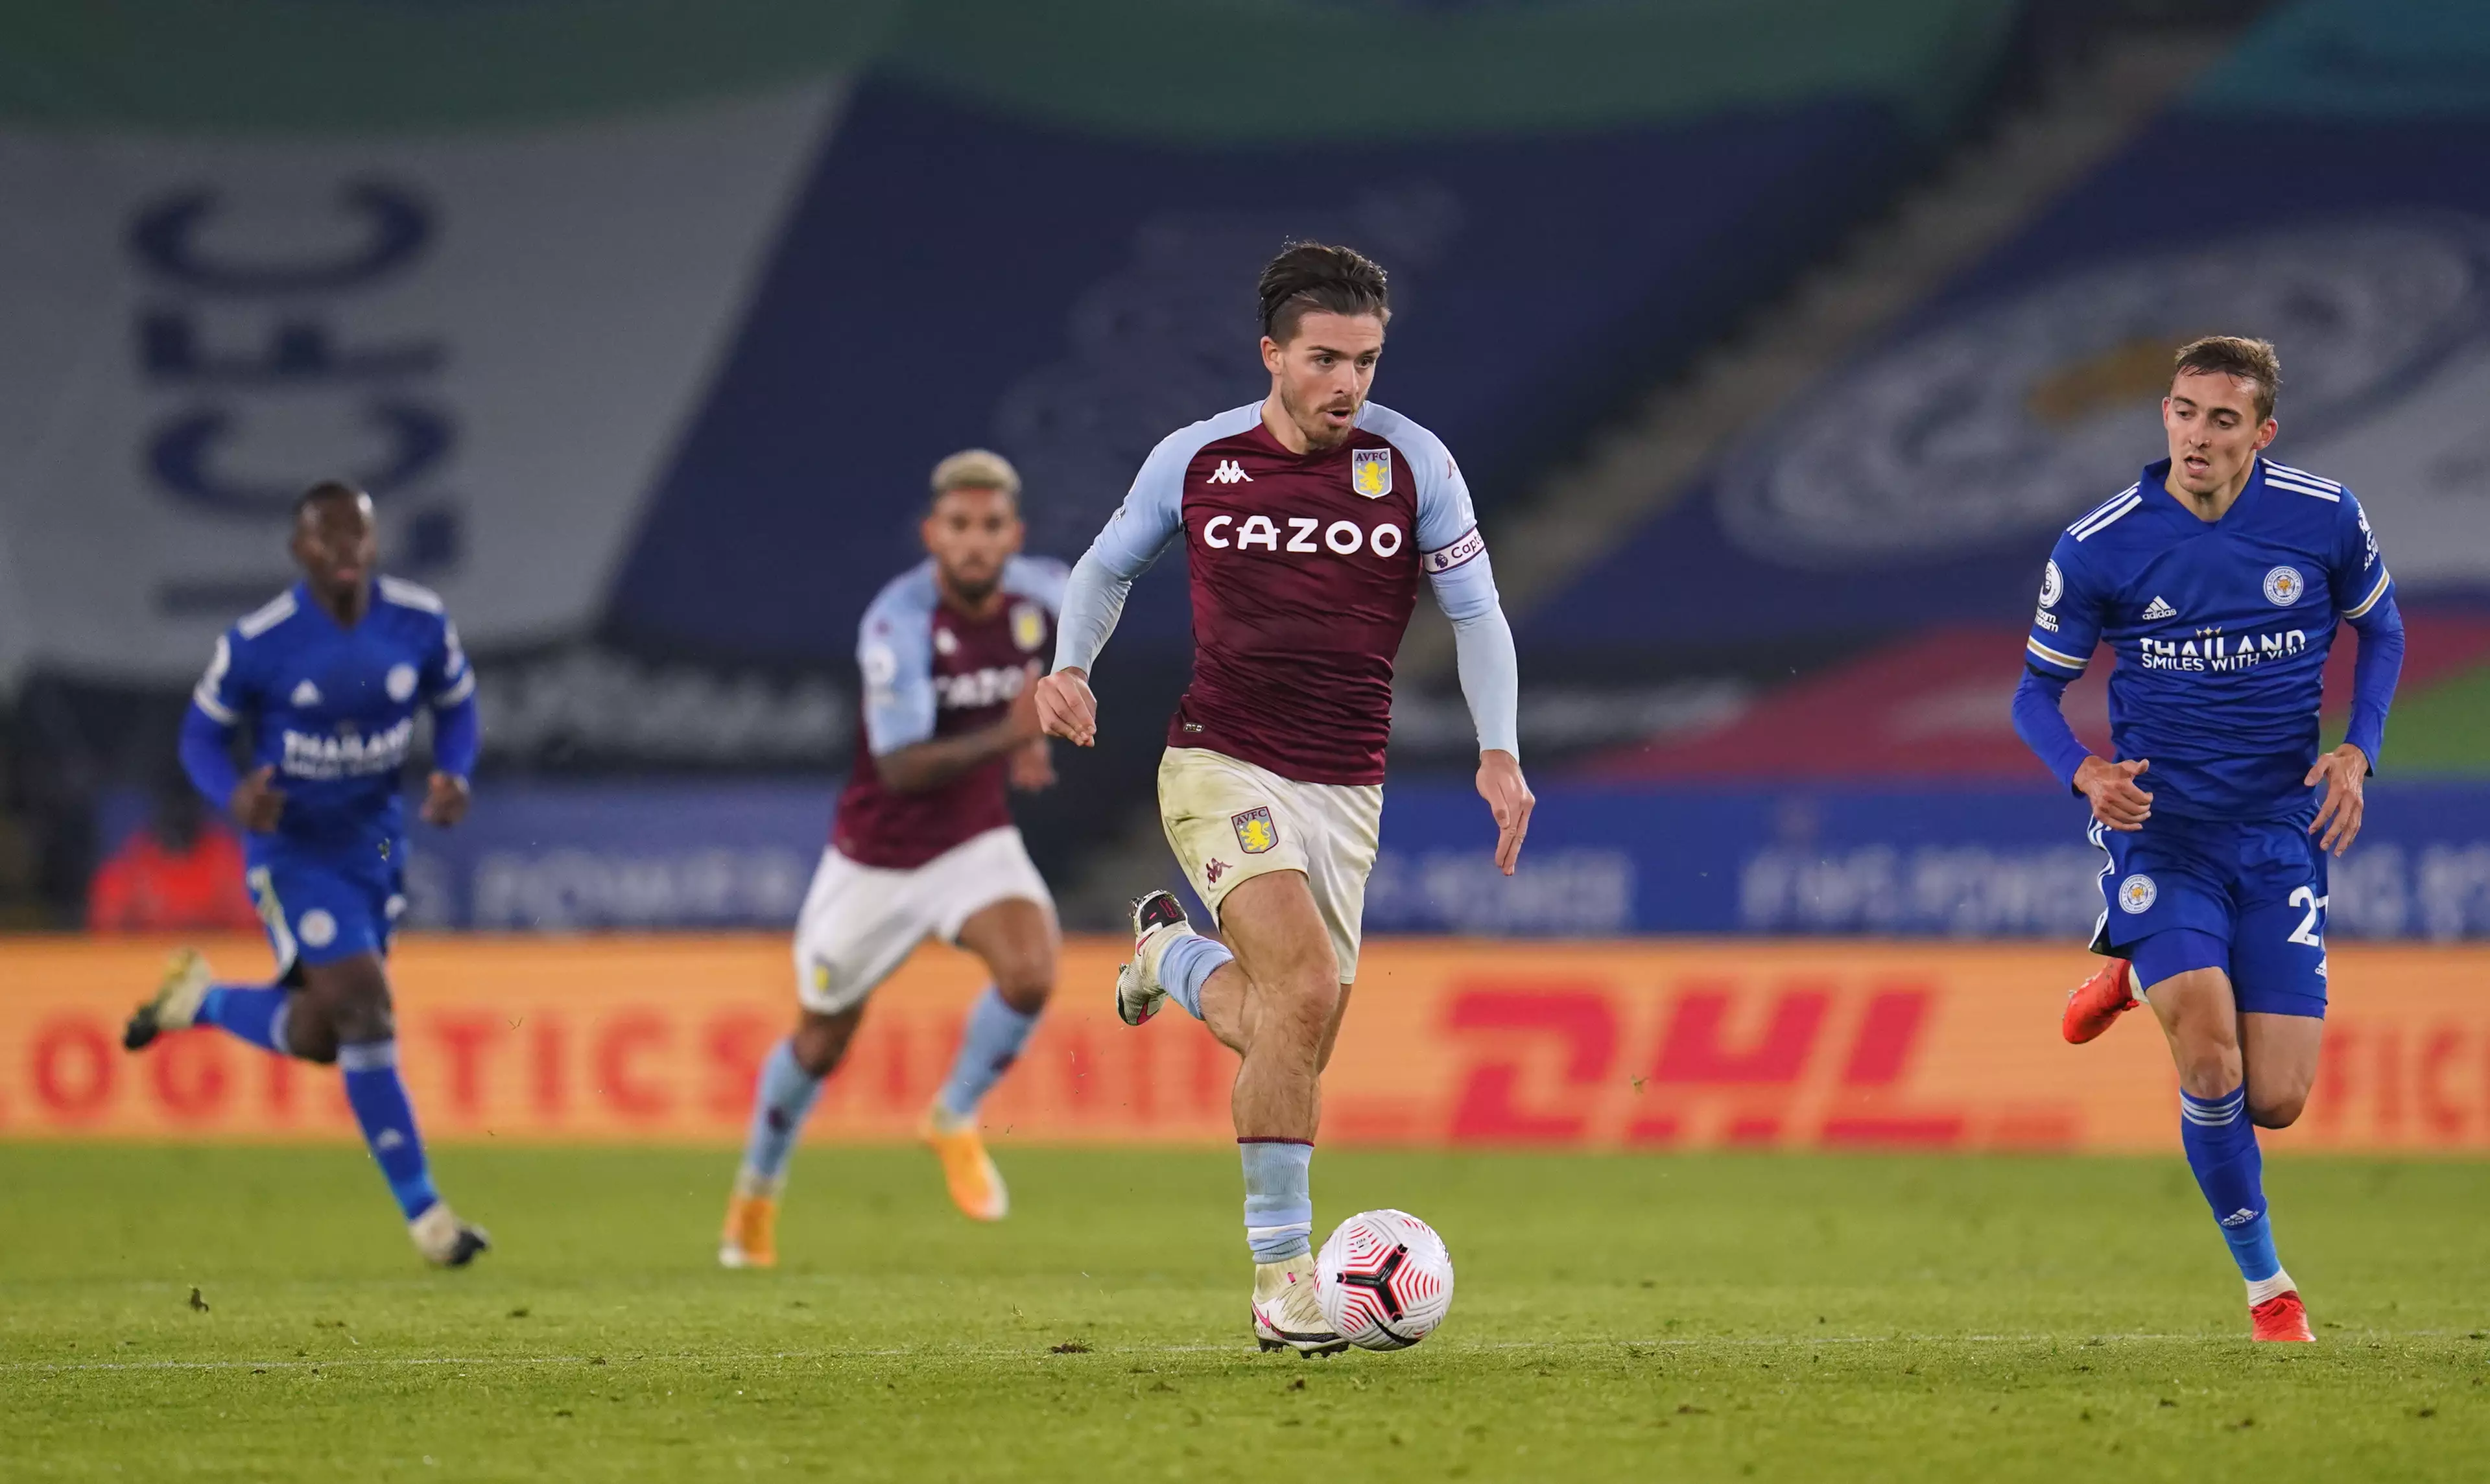 Grealish has been in impressive form recently. Image: PA Images